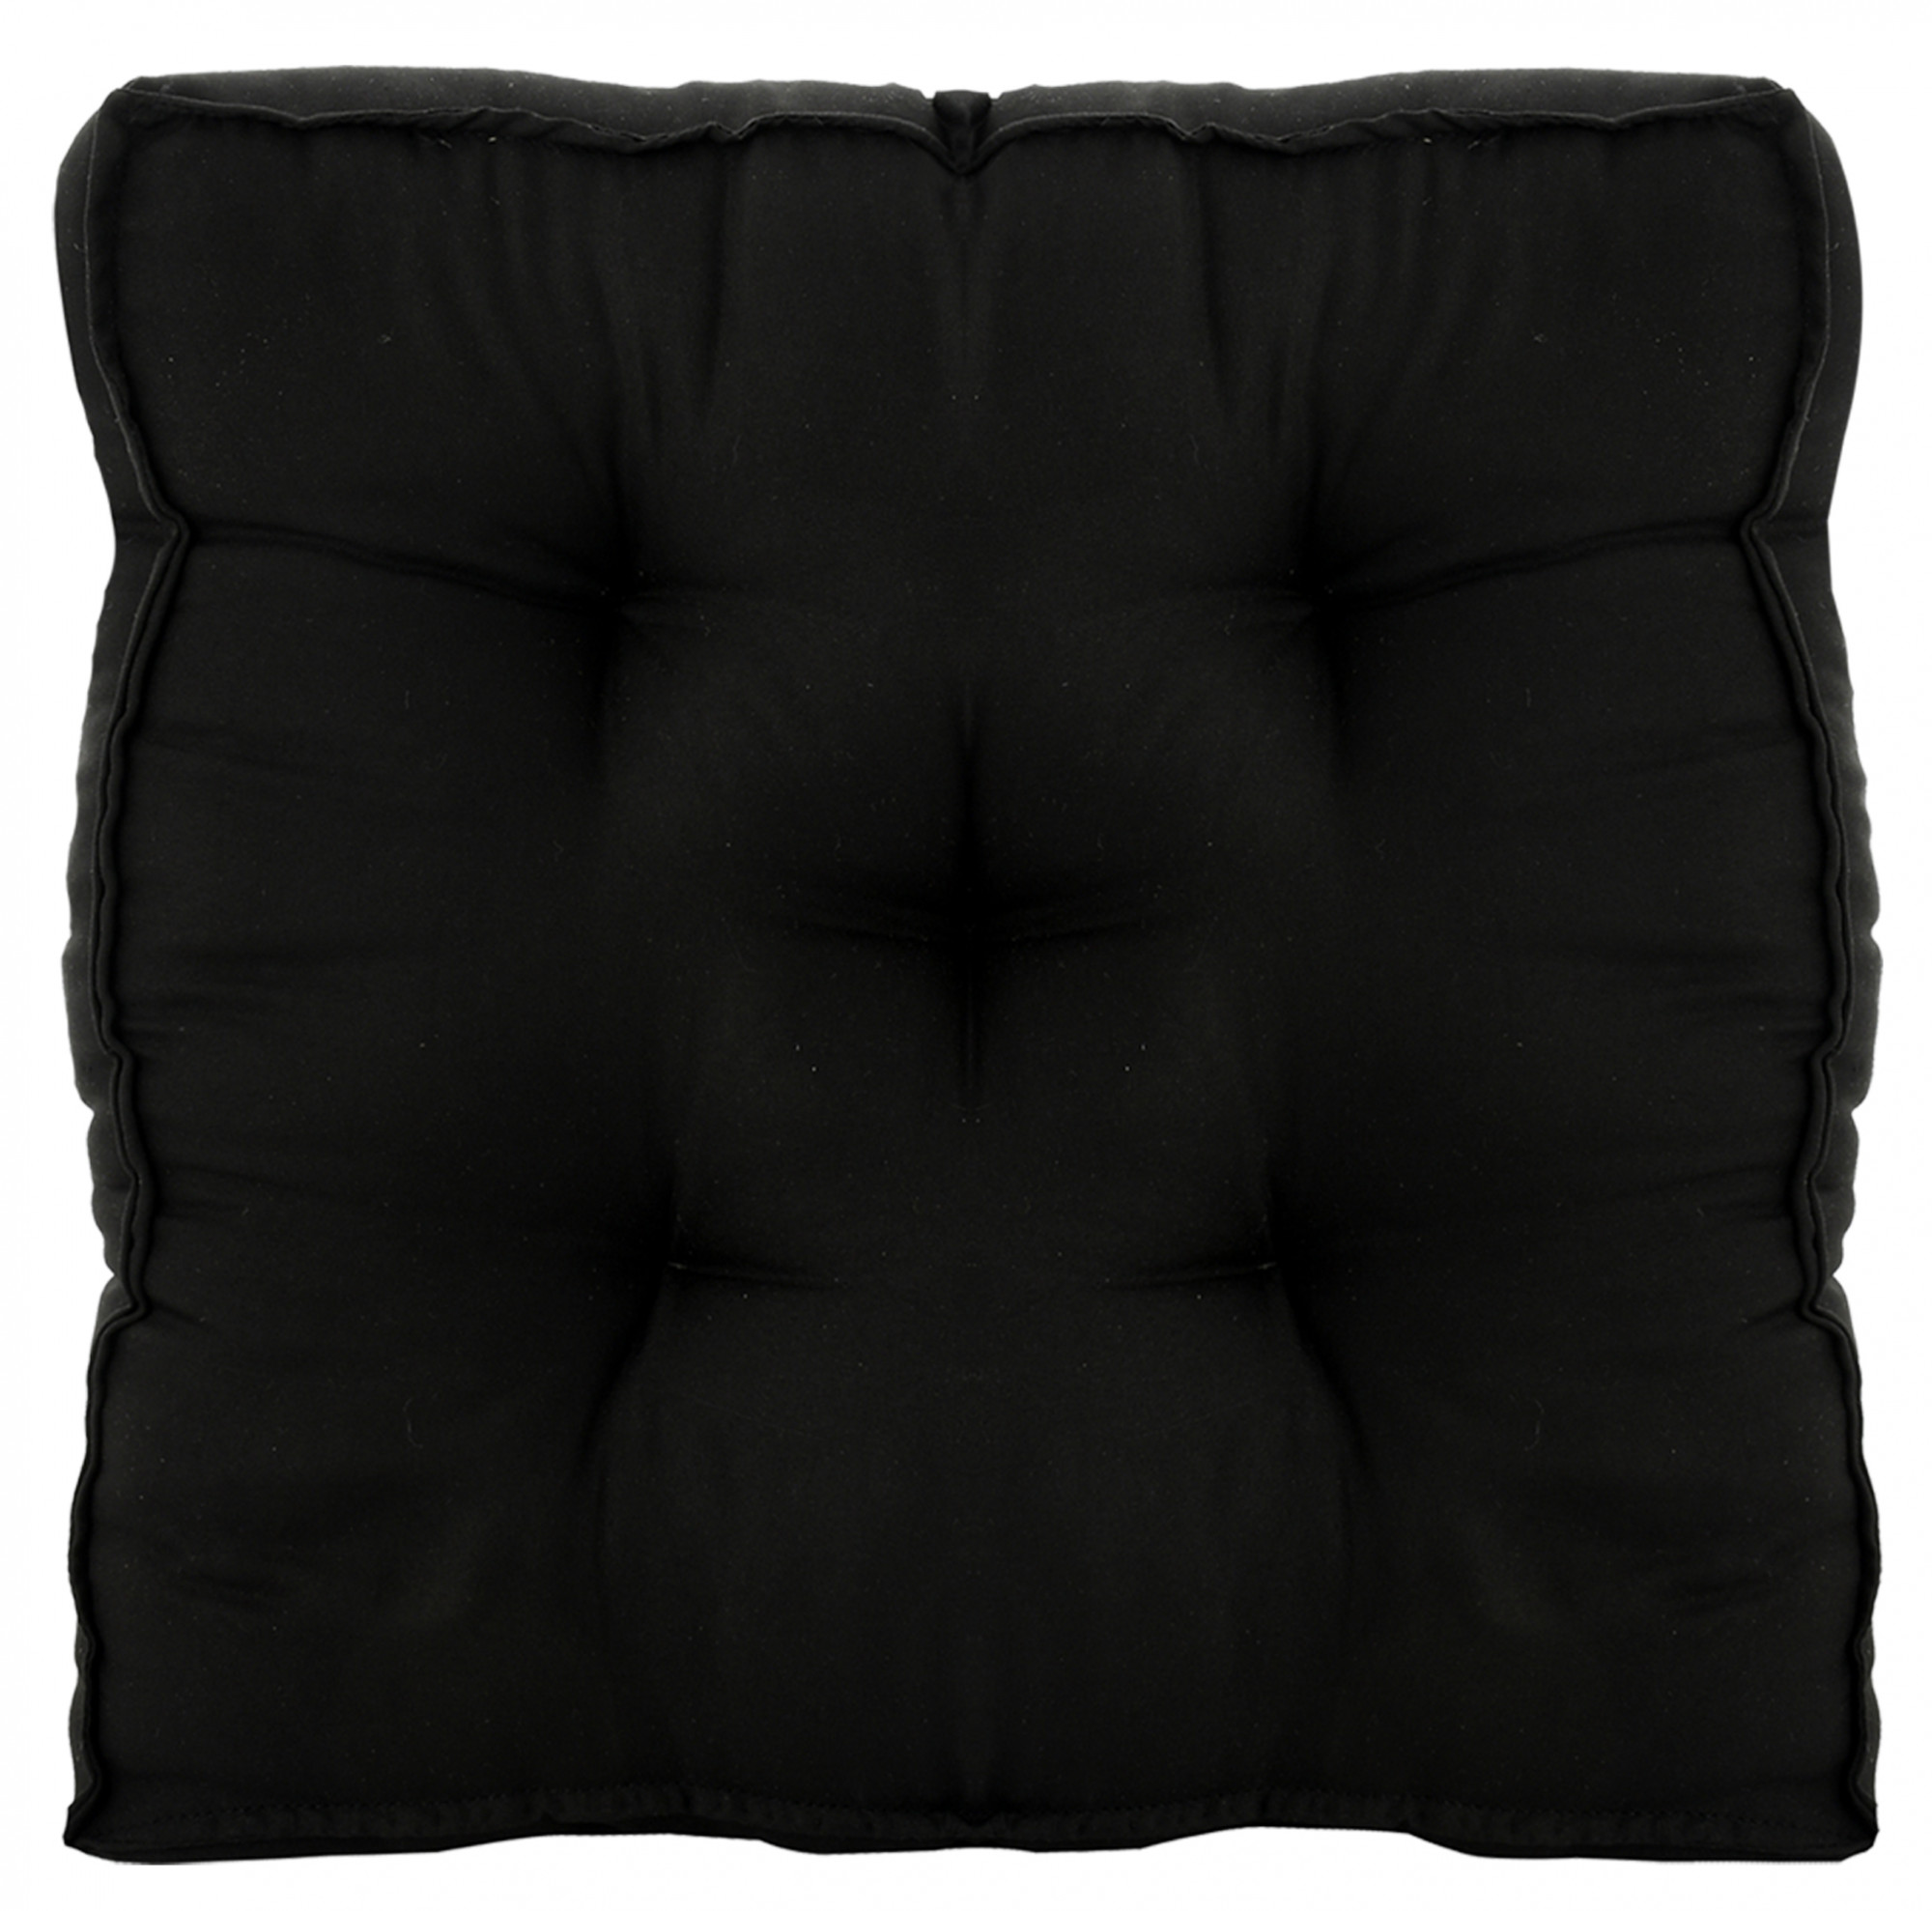 Kuber Industries Microfiber 18*48 Inch Back And Seat Chair Cushion With Ties & 18*18 Inch Square Cushion for Rocking Chair, Desk chair, Dining chairs, Lounge chair- Set of 2 (Black)